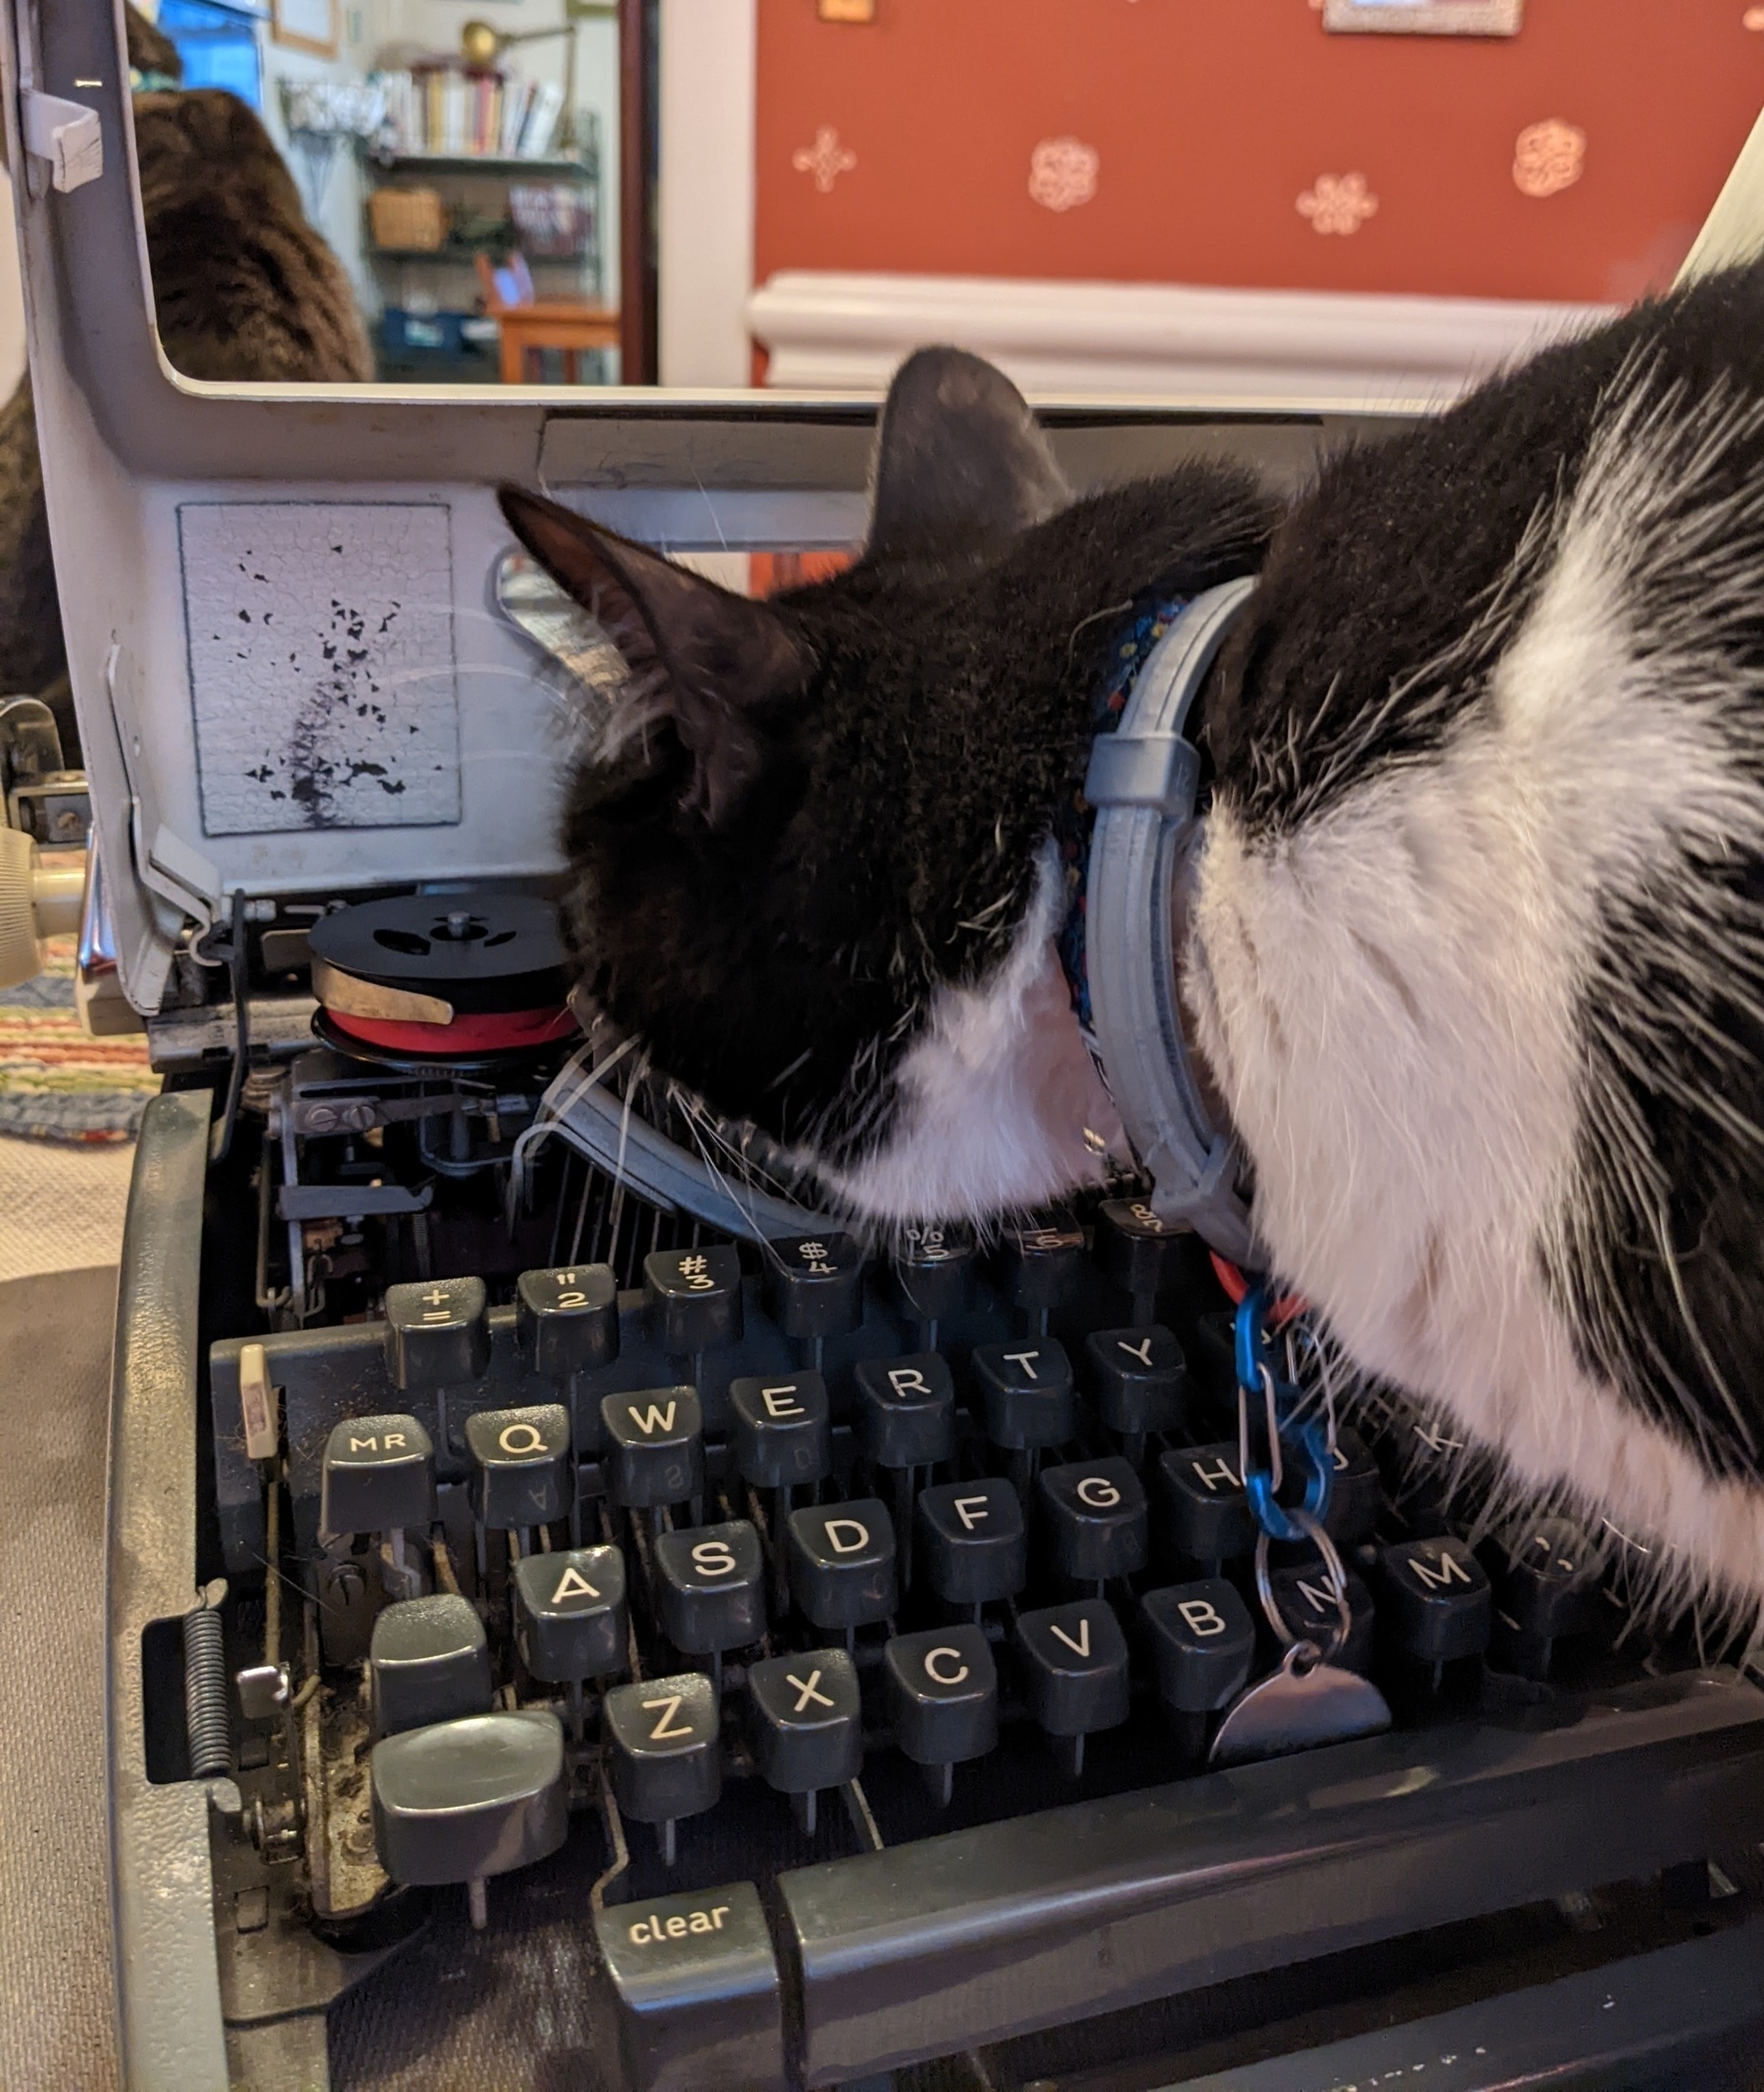 the typewriter lid is up and one cat has pushed her face under the lid to sniff the new typewriter ribbon